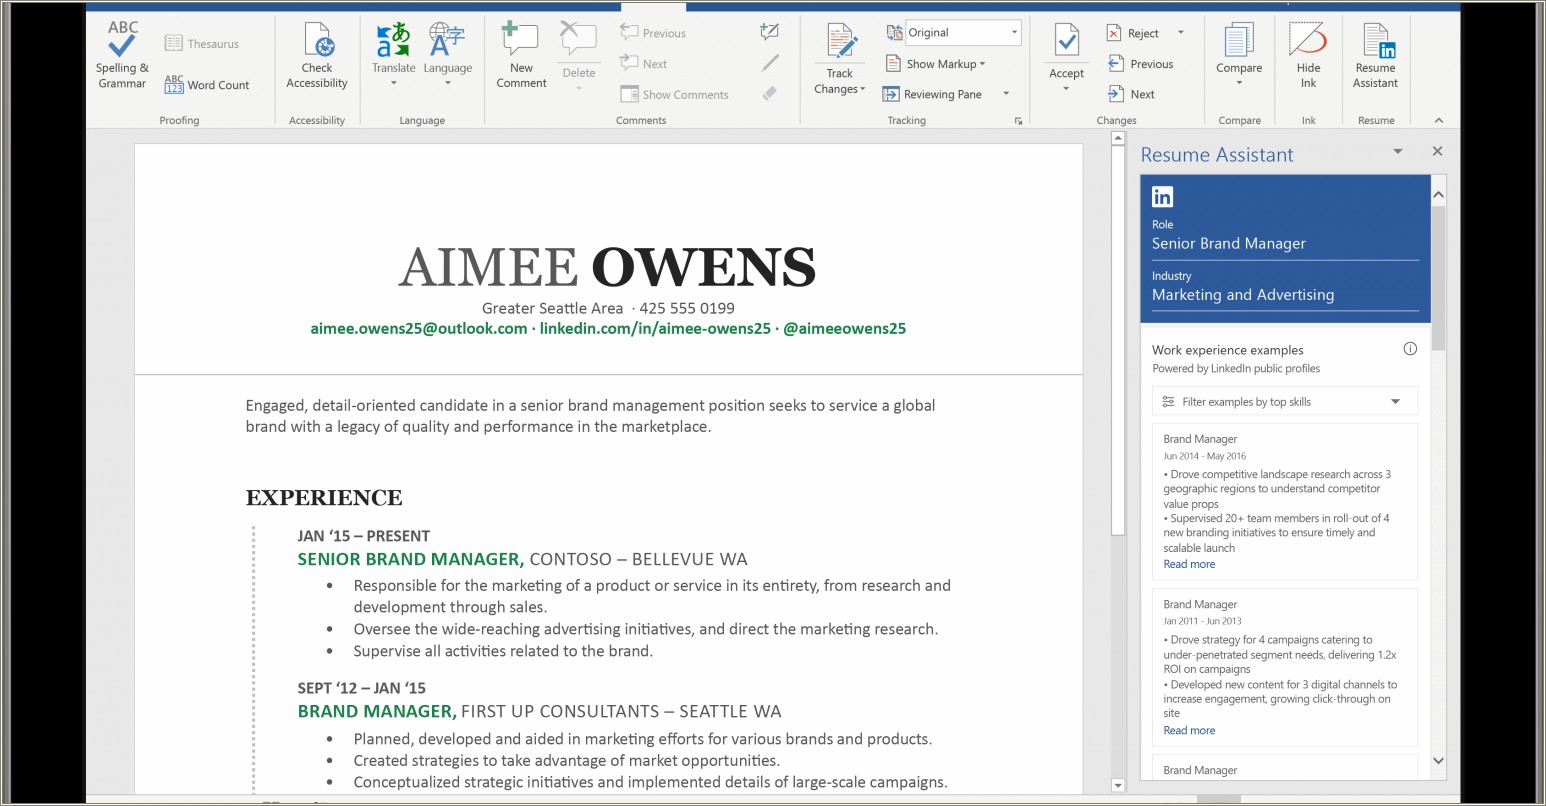 Is Microsoft Office Suite Worth Putting On Resume